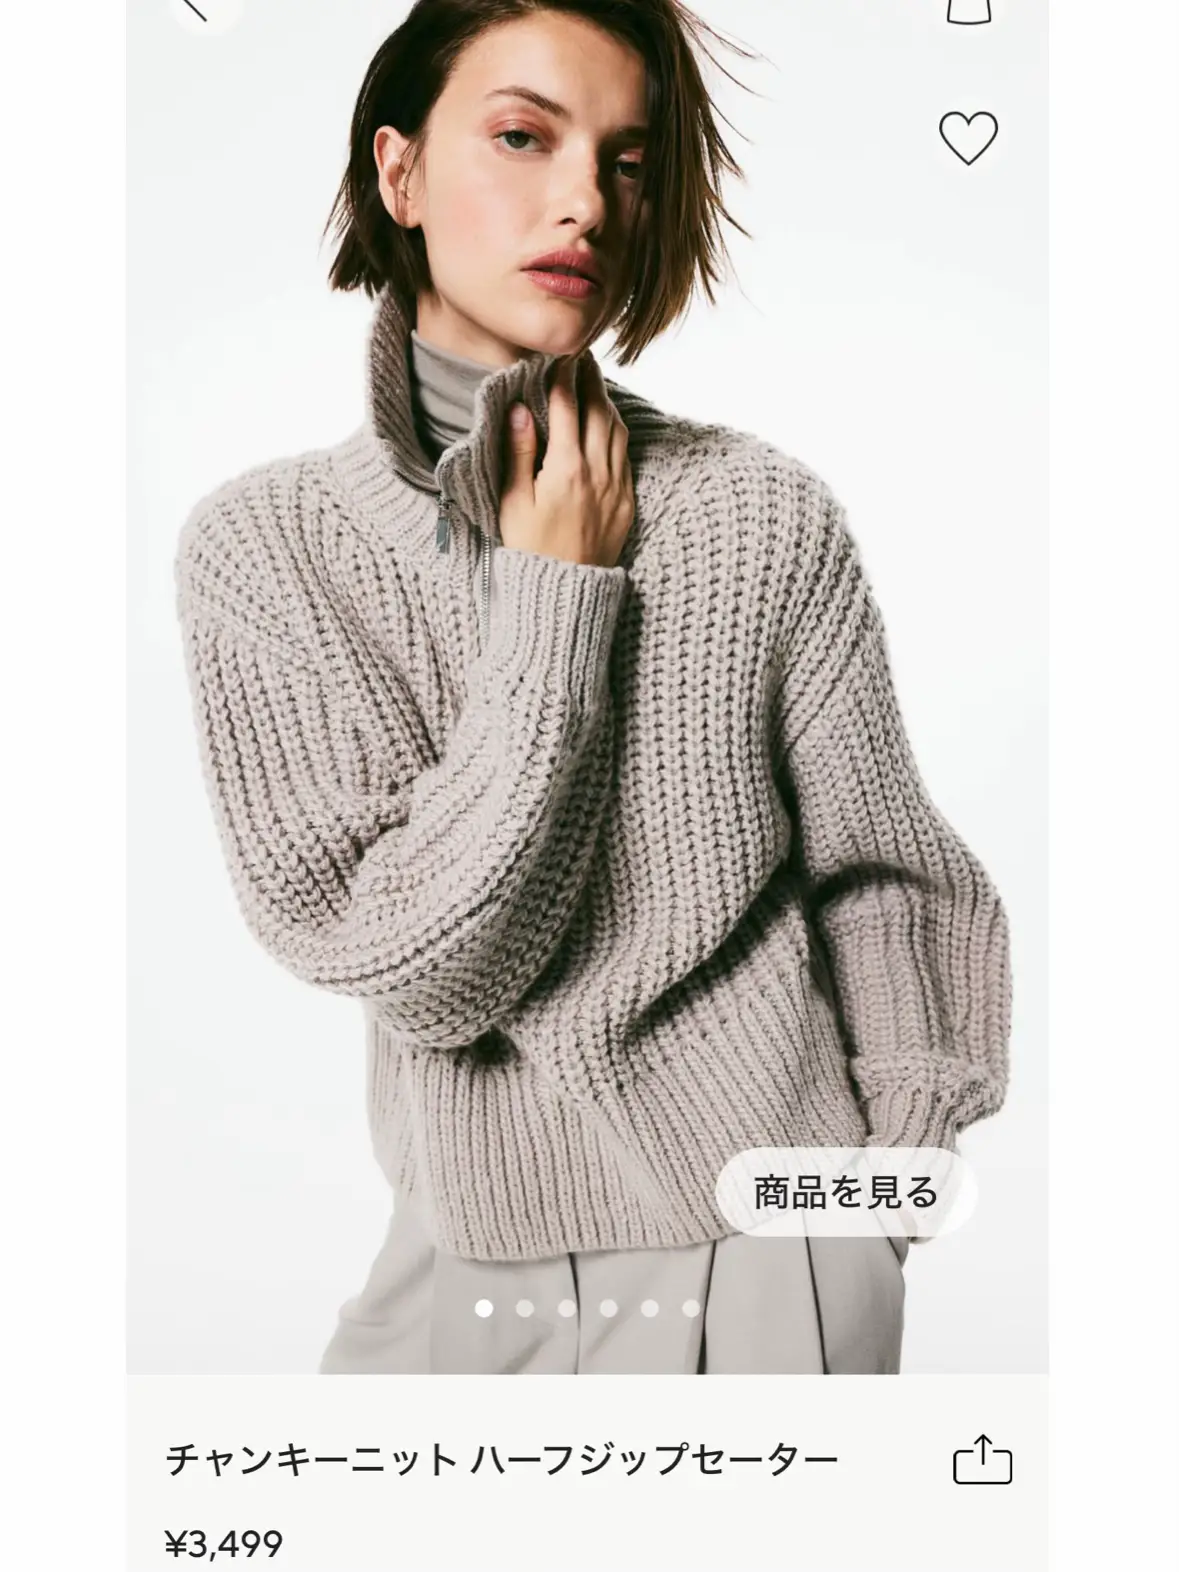 Real by H & M Chunky Knit🐑 | Gallery posted by 𝓴𝓲𝓴𝓾 | Lemon8